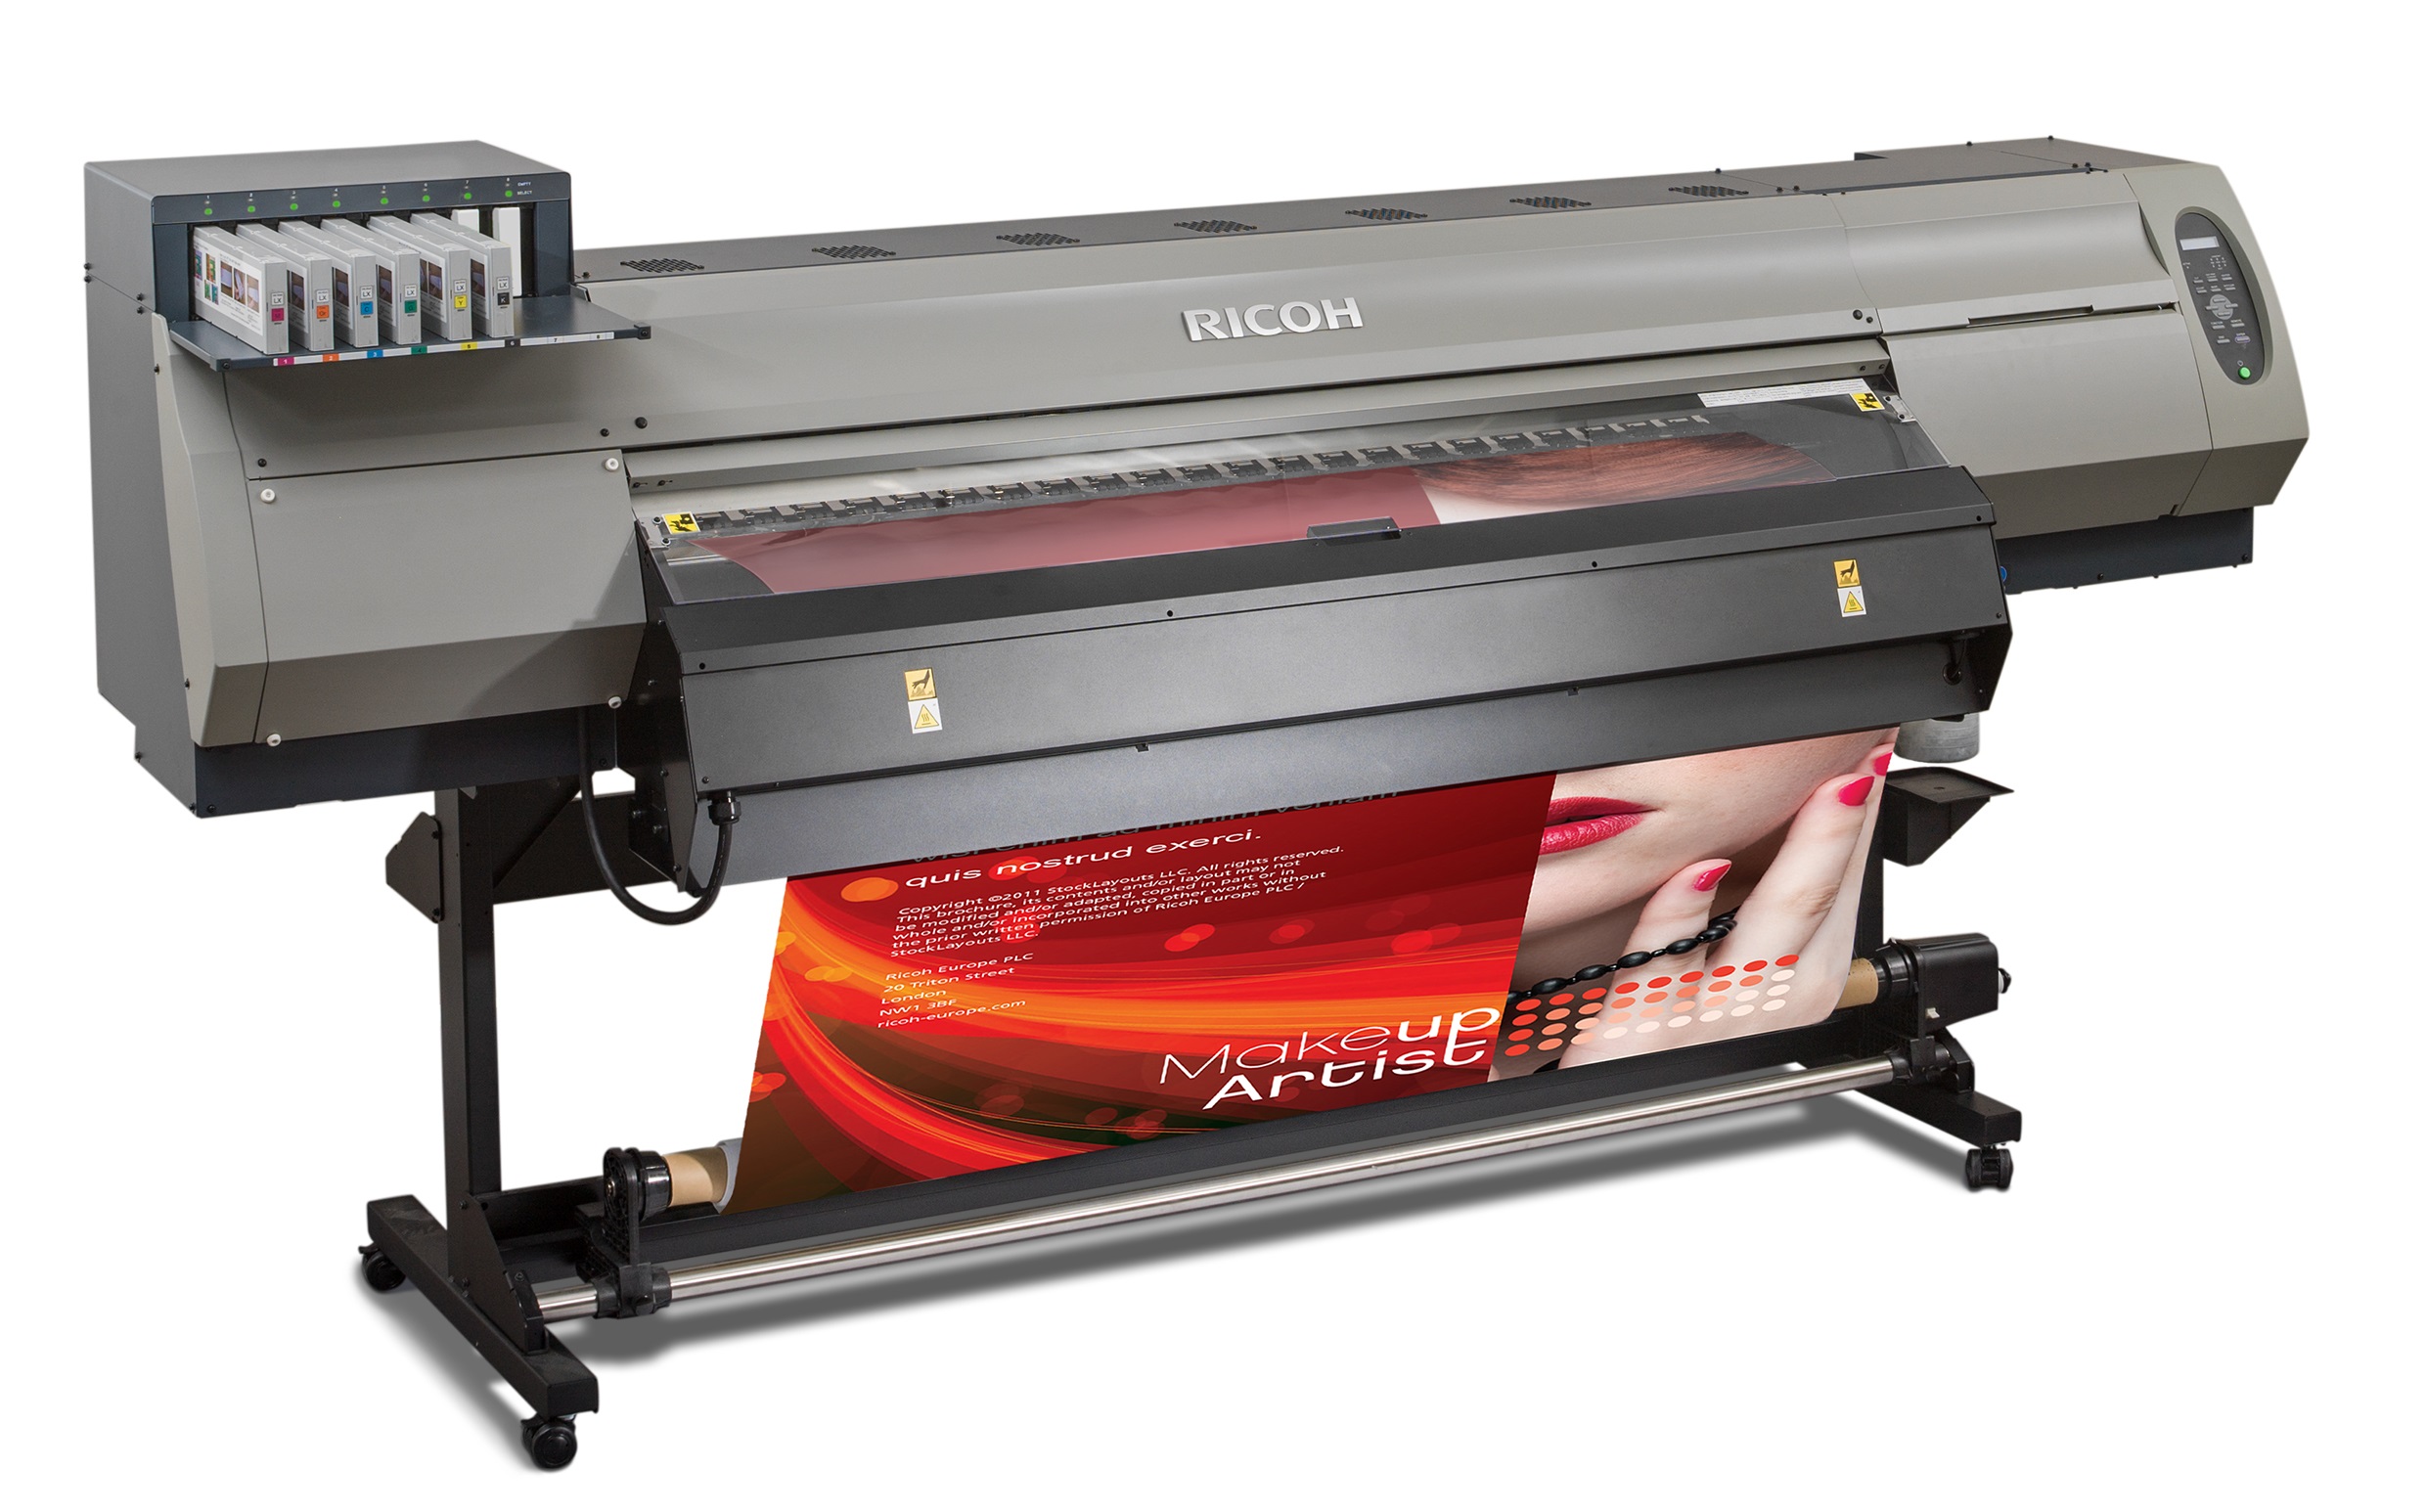 Ricoh supports new market moves for print service providers at FESPA 2017